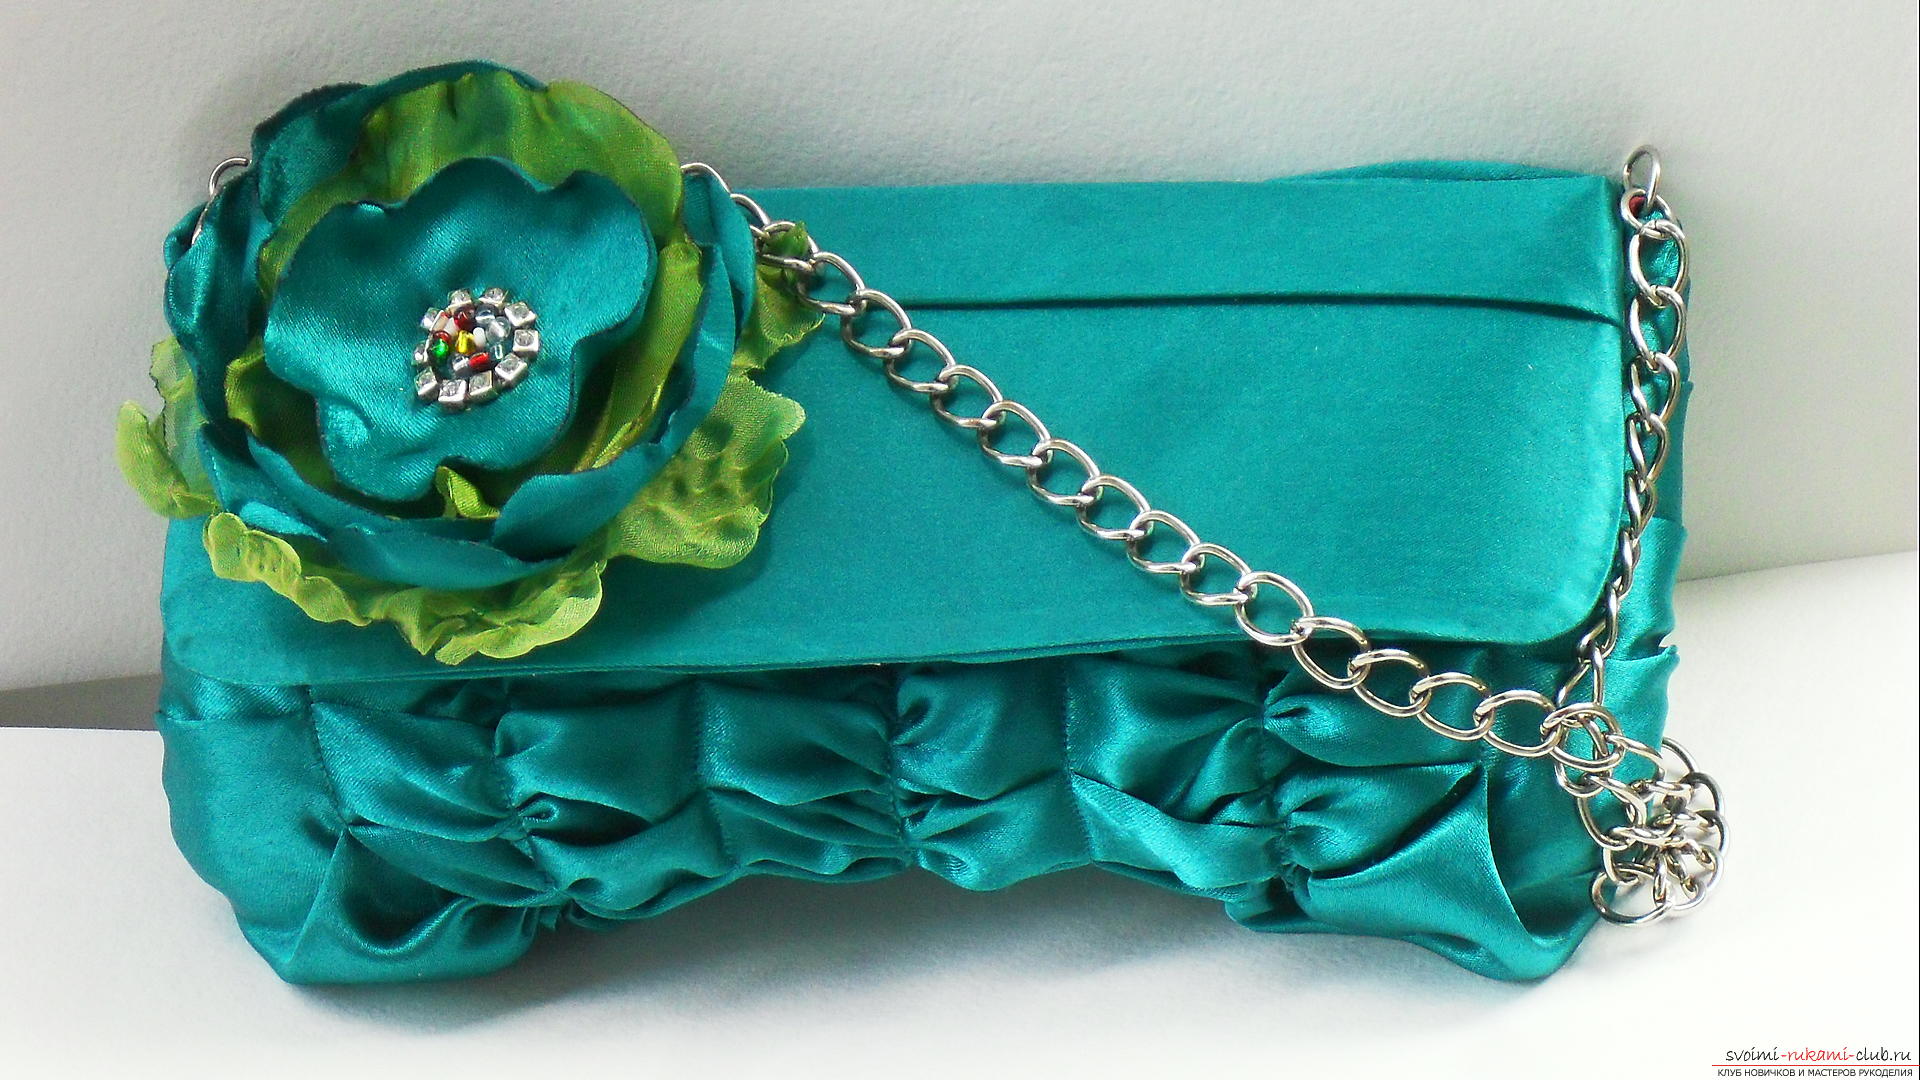 The clutch is a remake of satin. Photo №1